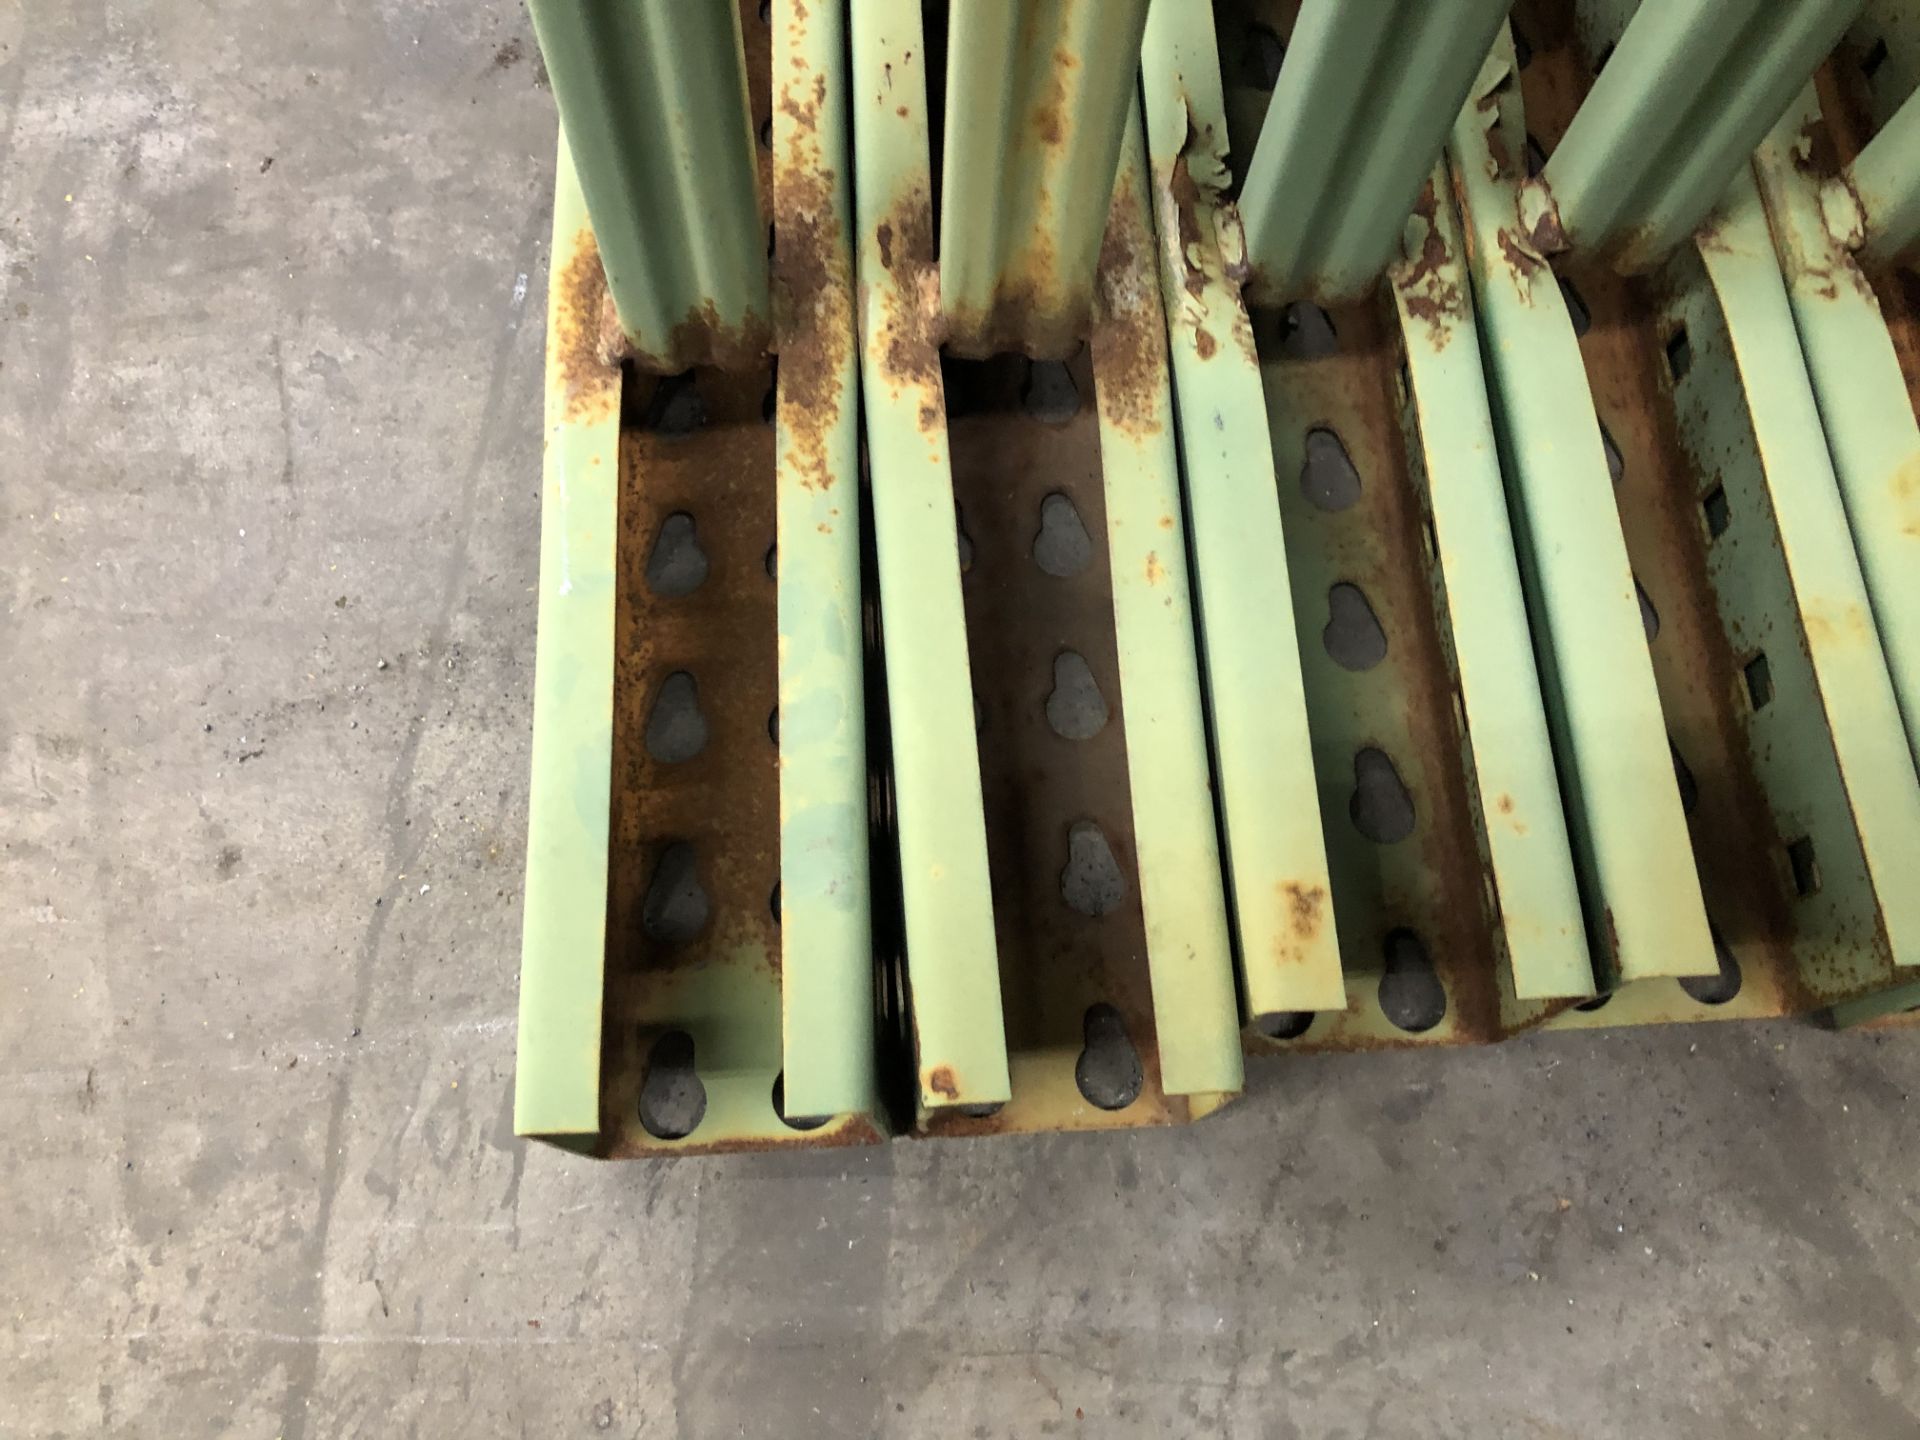 LOT OF TRUCK LOAD USED PALLET RACKS - 16"H X 34"D X 96"L - Image 2 of 3